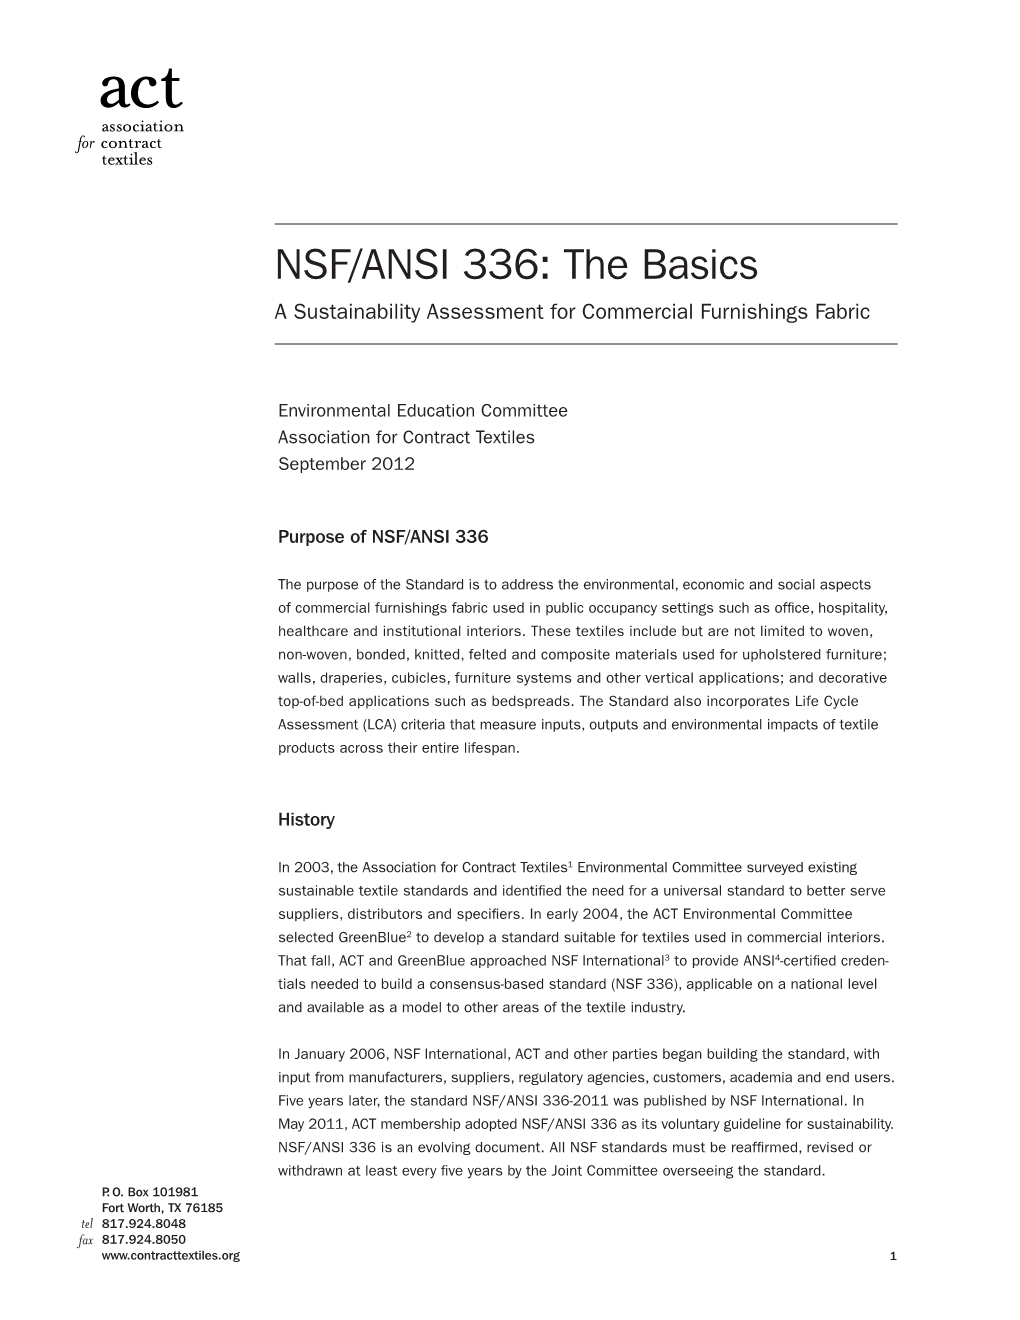 NSF/ANSI 336: the Basics a Sustainability Assessment for Commercial Furnishings Fabric